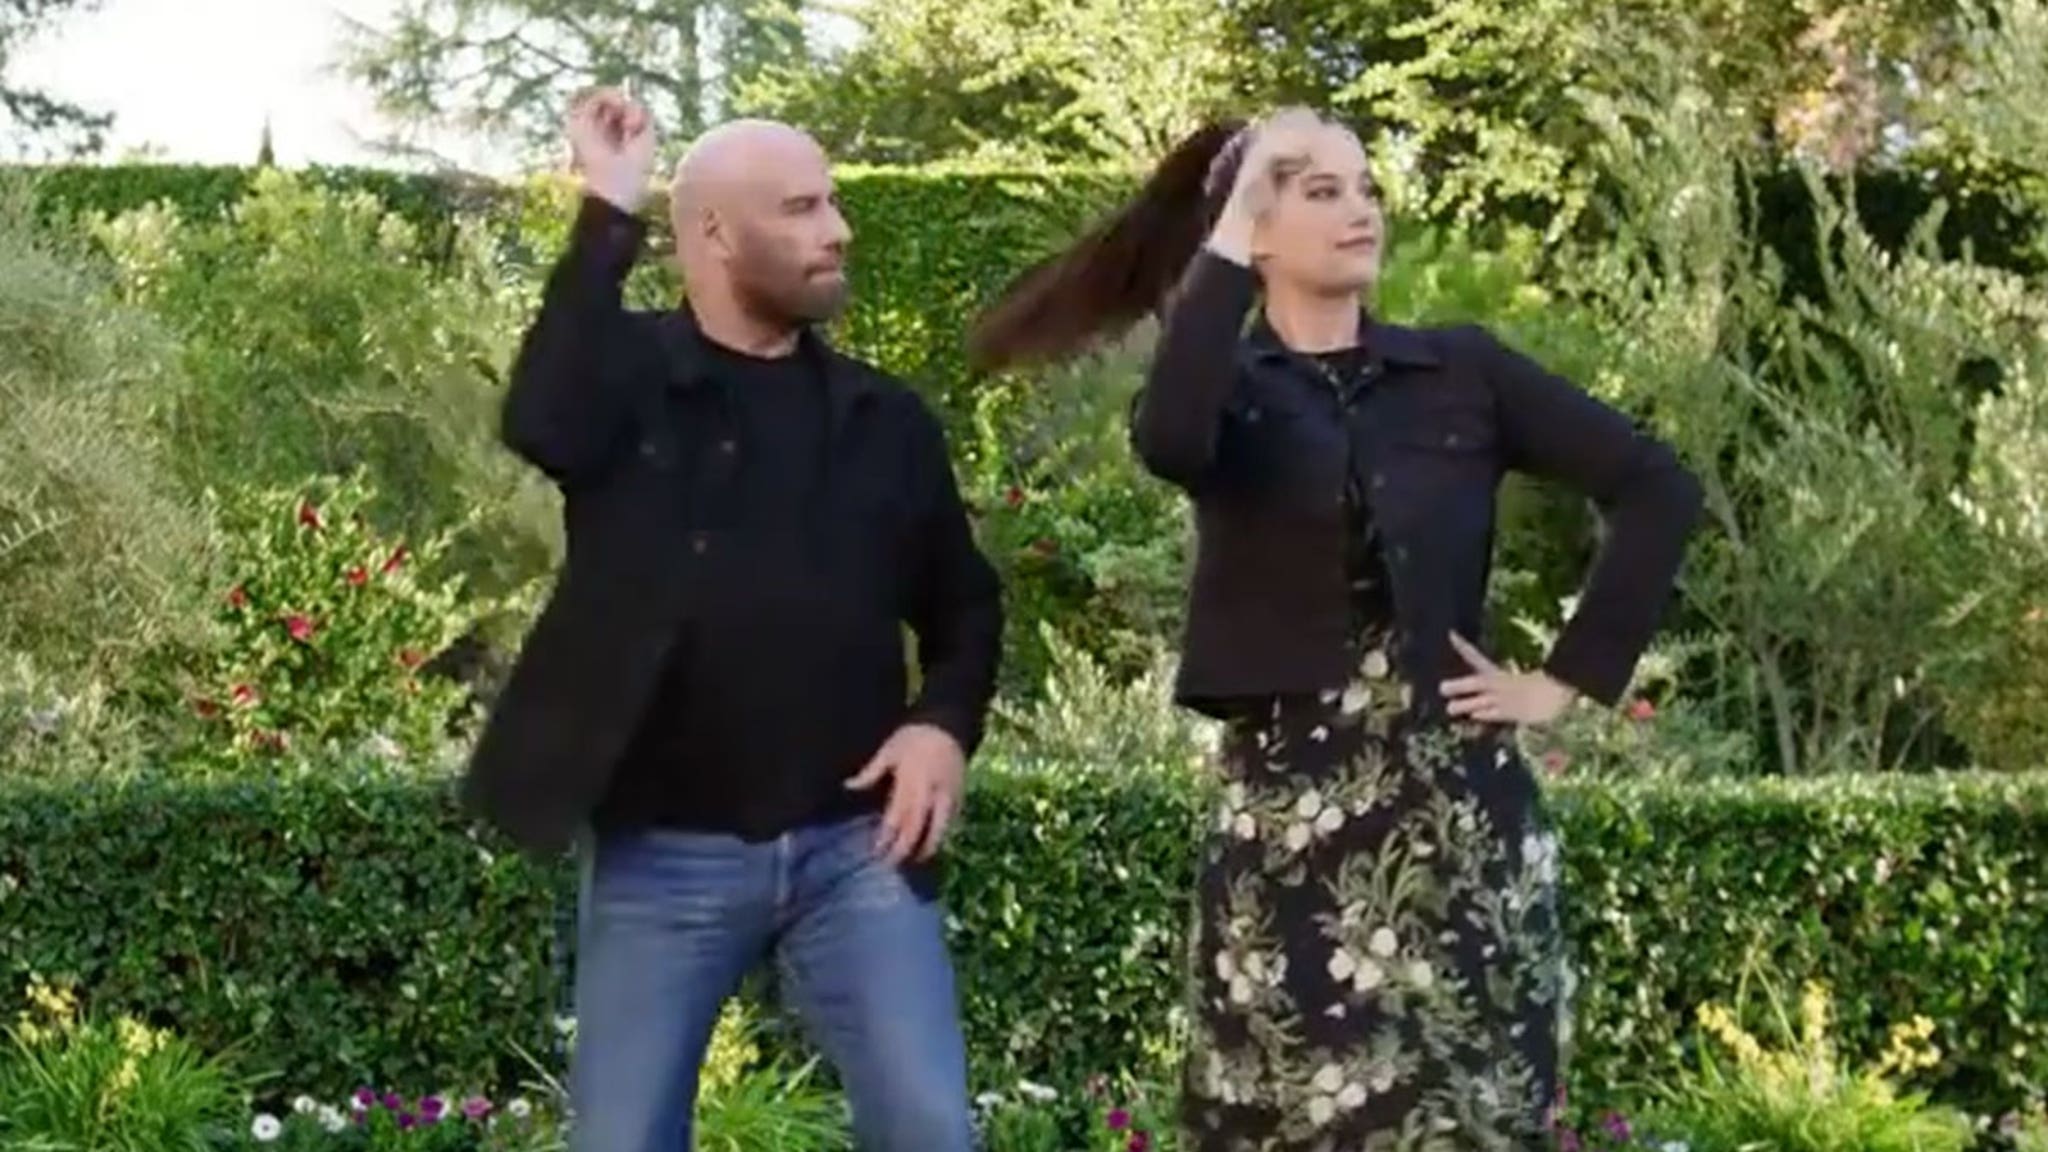 John Travolta and daughter recreate the ‘Grease’ dance for the Super Bowl ad